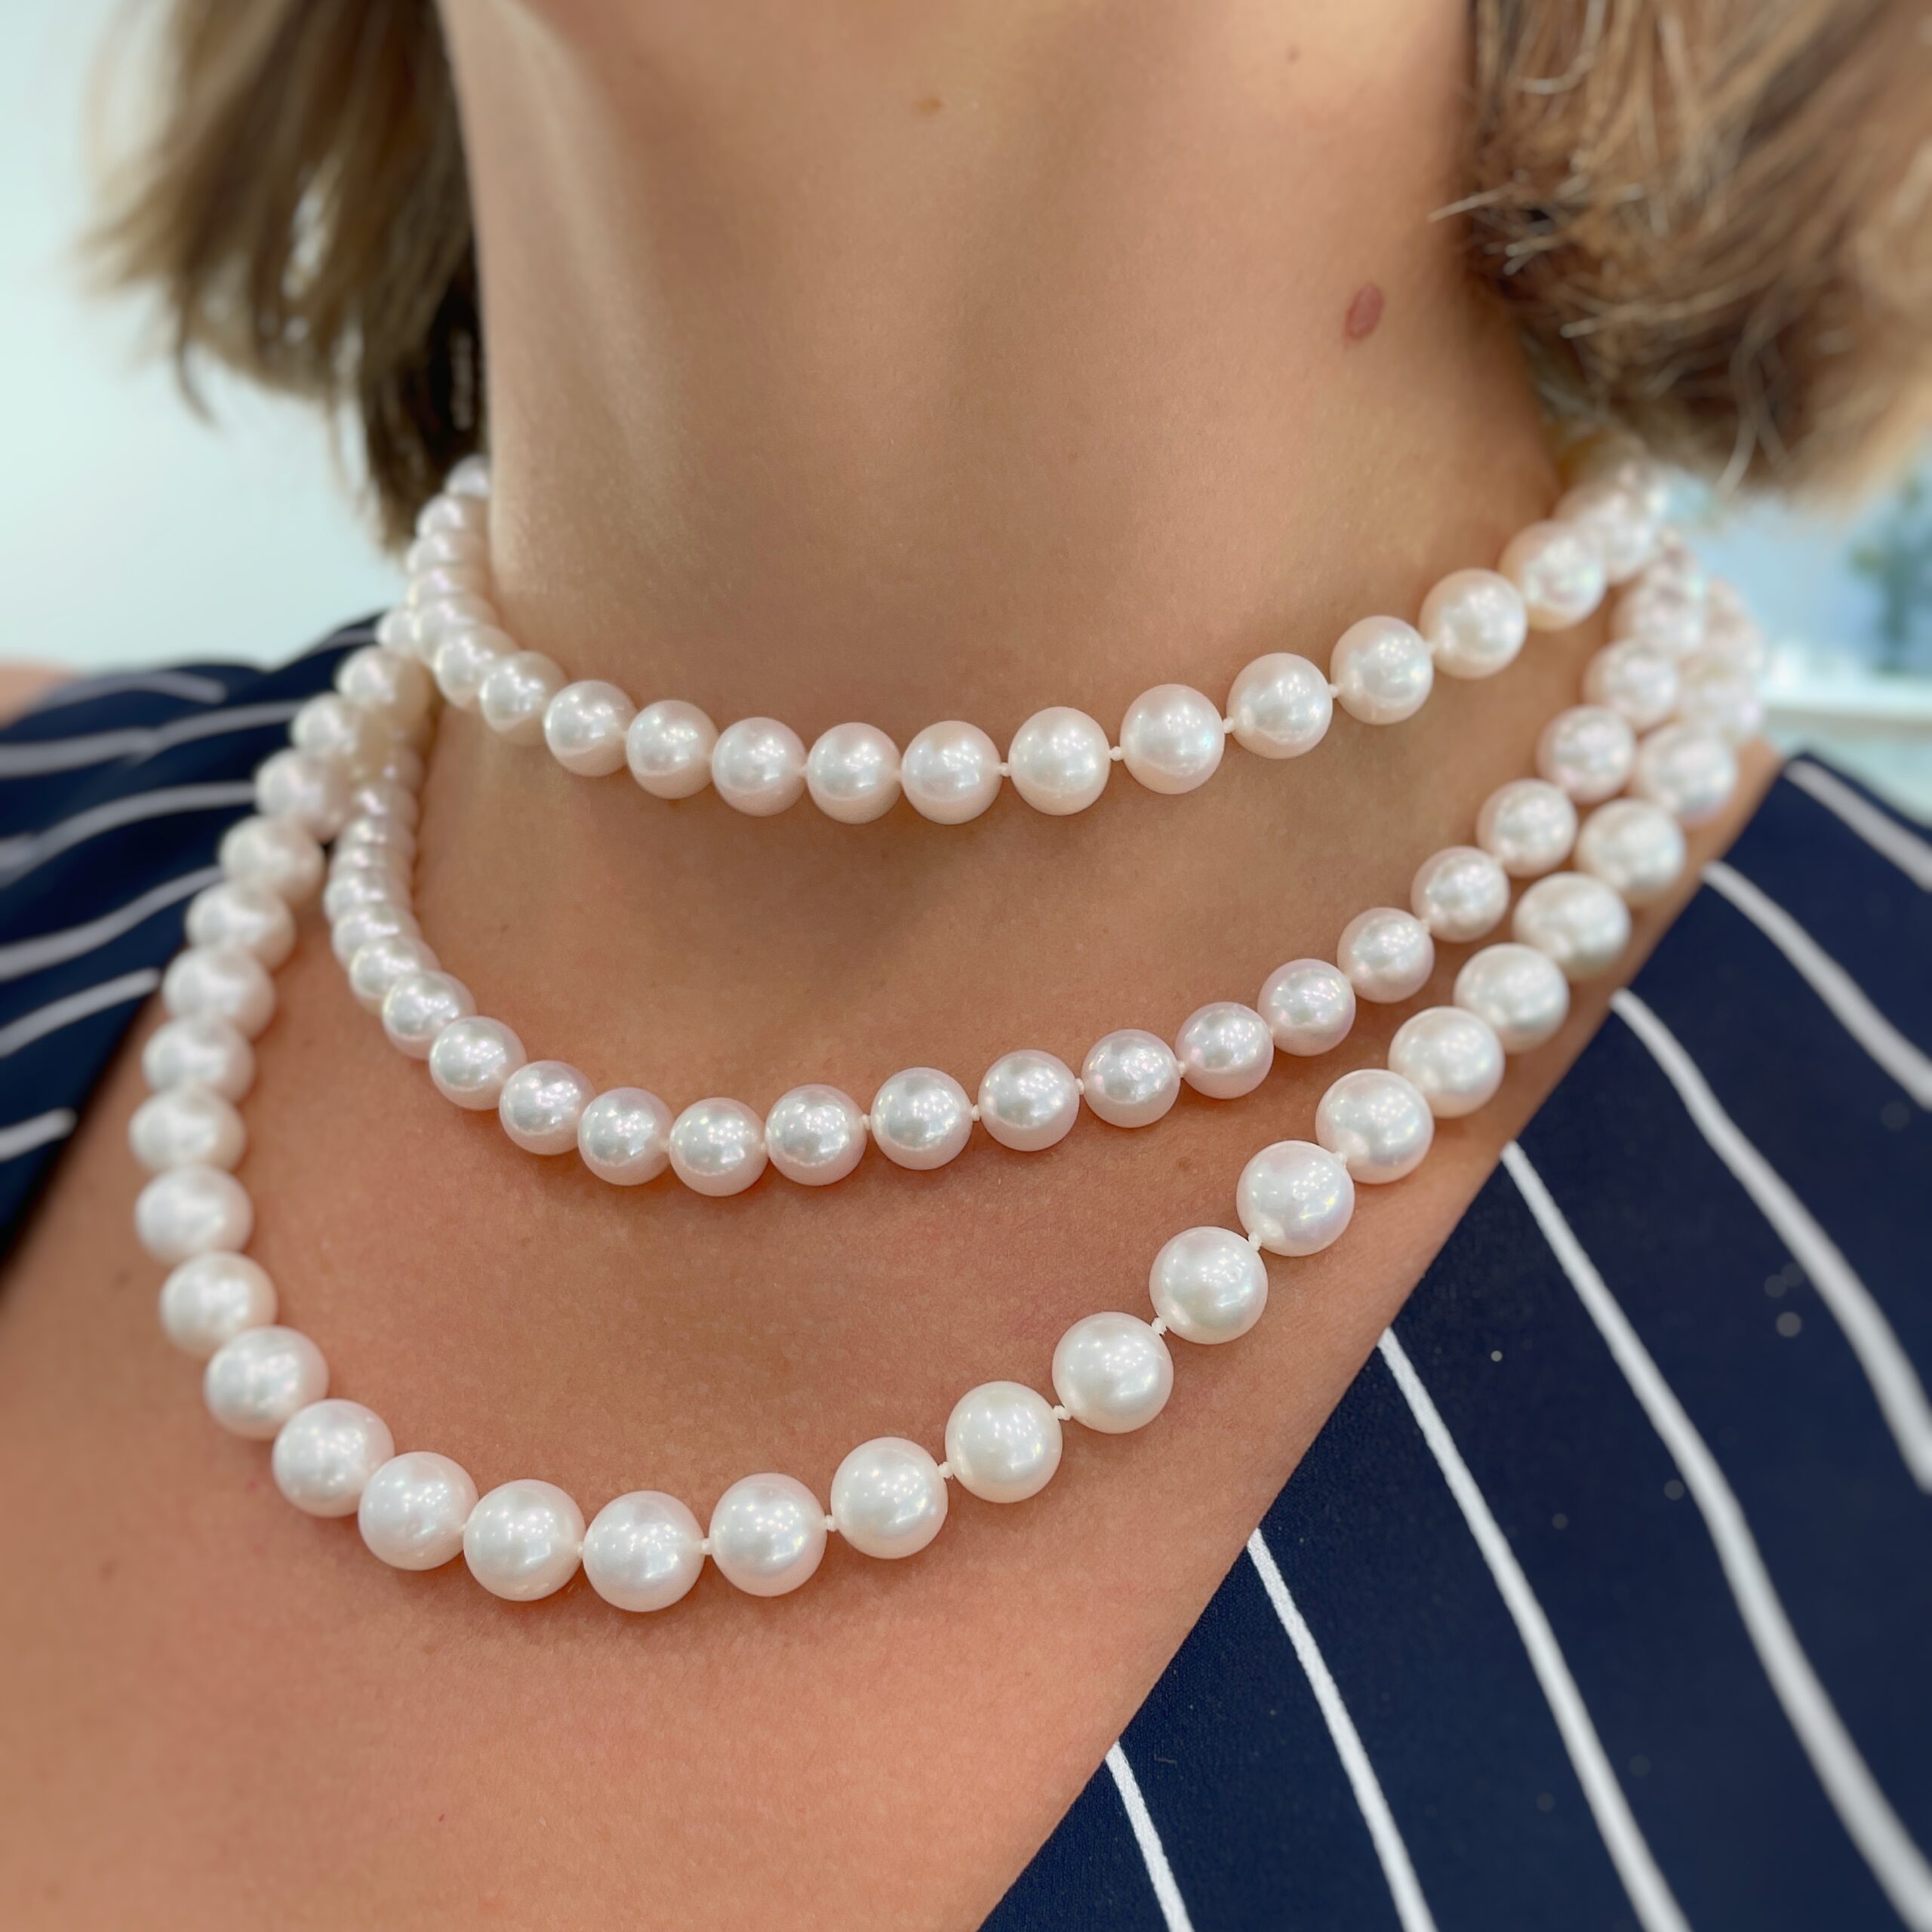 Double Strand 36 inch Pearl Necklace